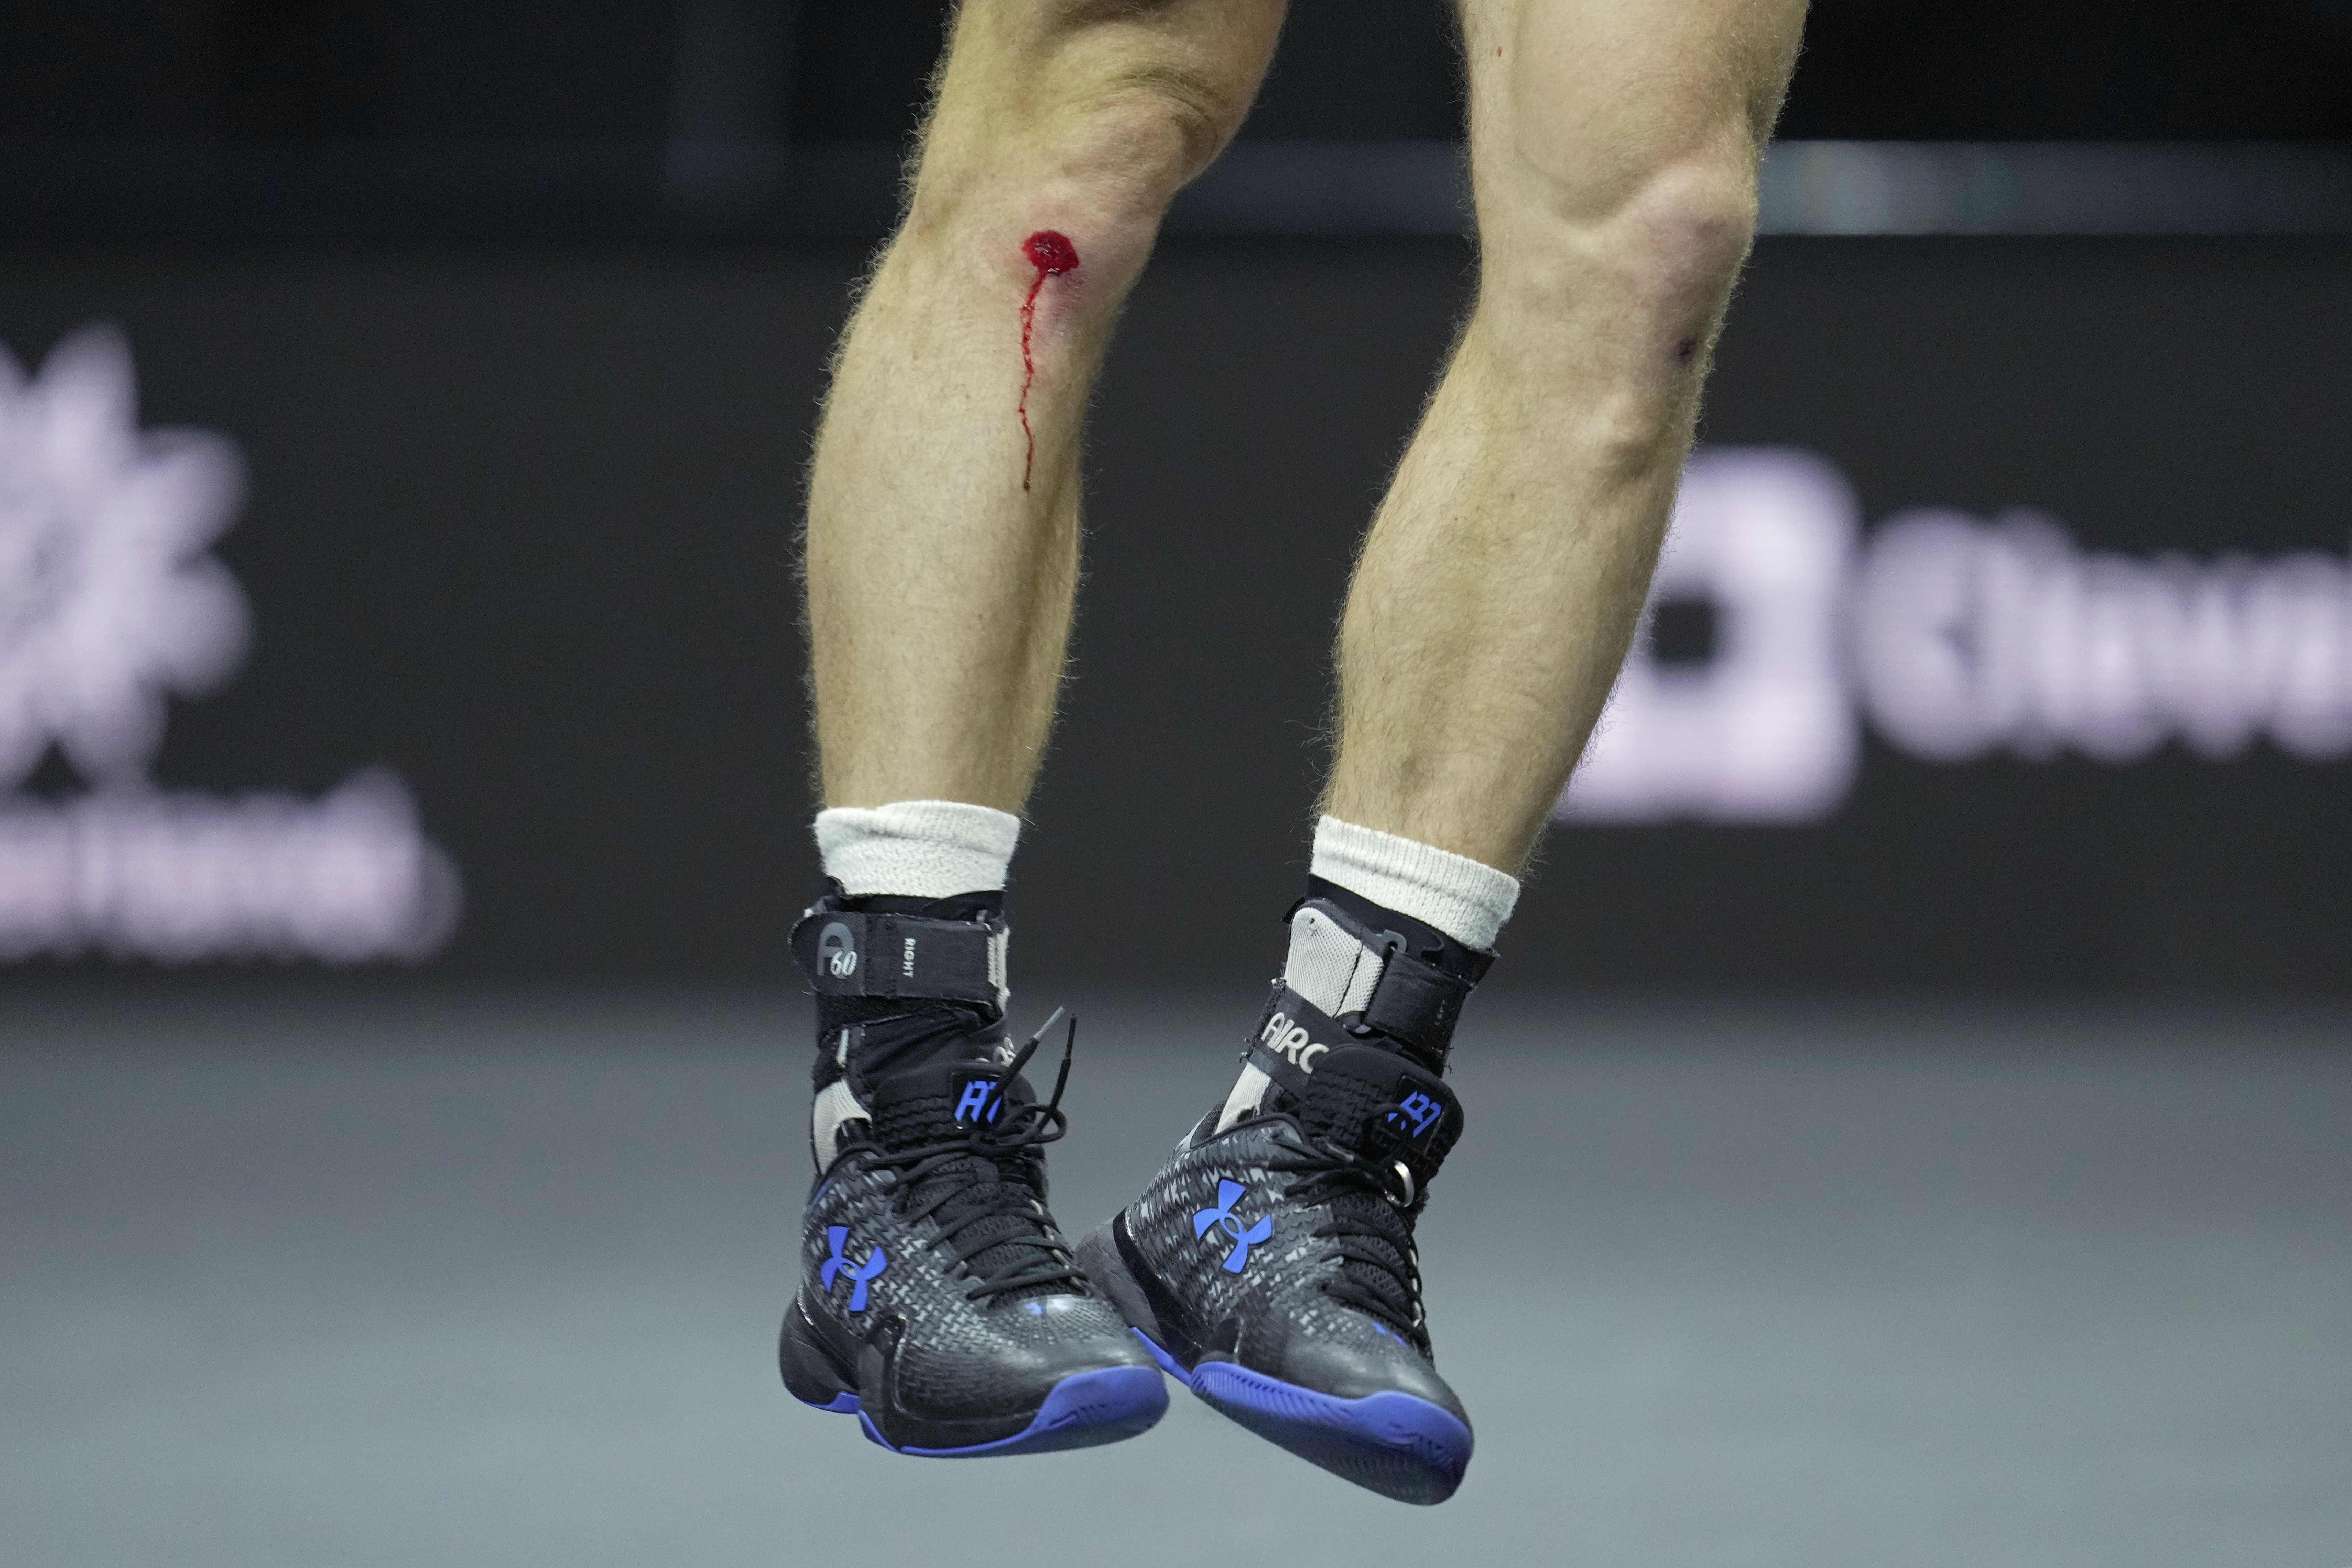 , Watch Andy Murray and Berrettini run into each other at Laver Cup but STILL win point as Brit’s knee left bloodied